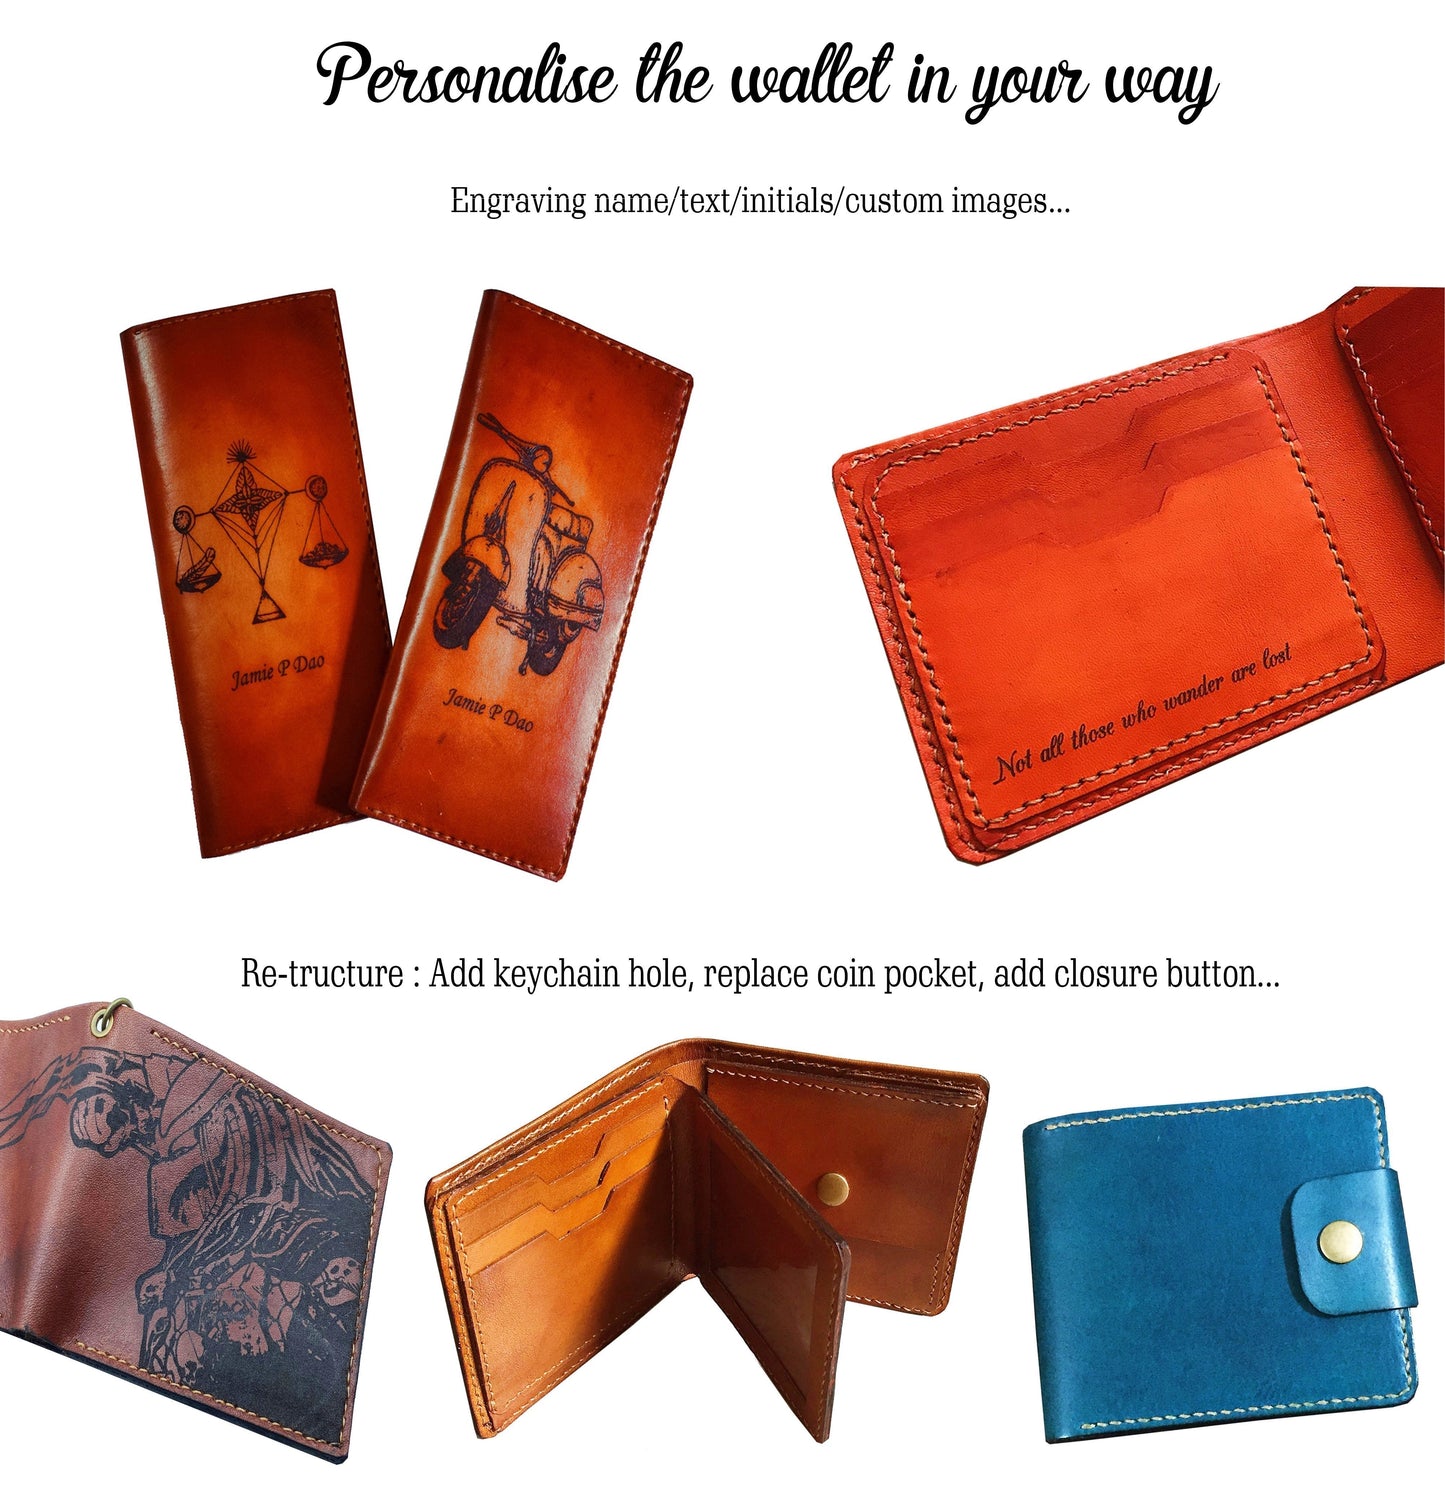 Mayan Corner - Customized leather handmade wallet for men, dragon men's wallet, gift for dad, husband, brother - Toothless and Hiccup How to train your dragon movie - 3110227